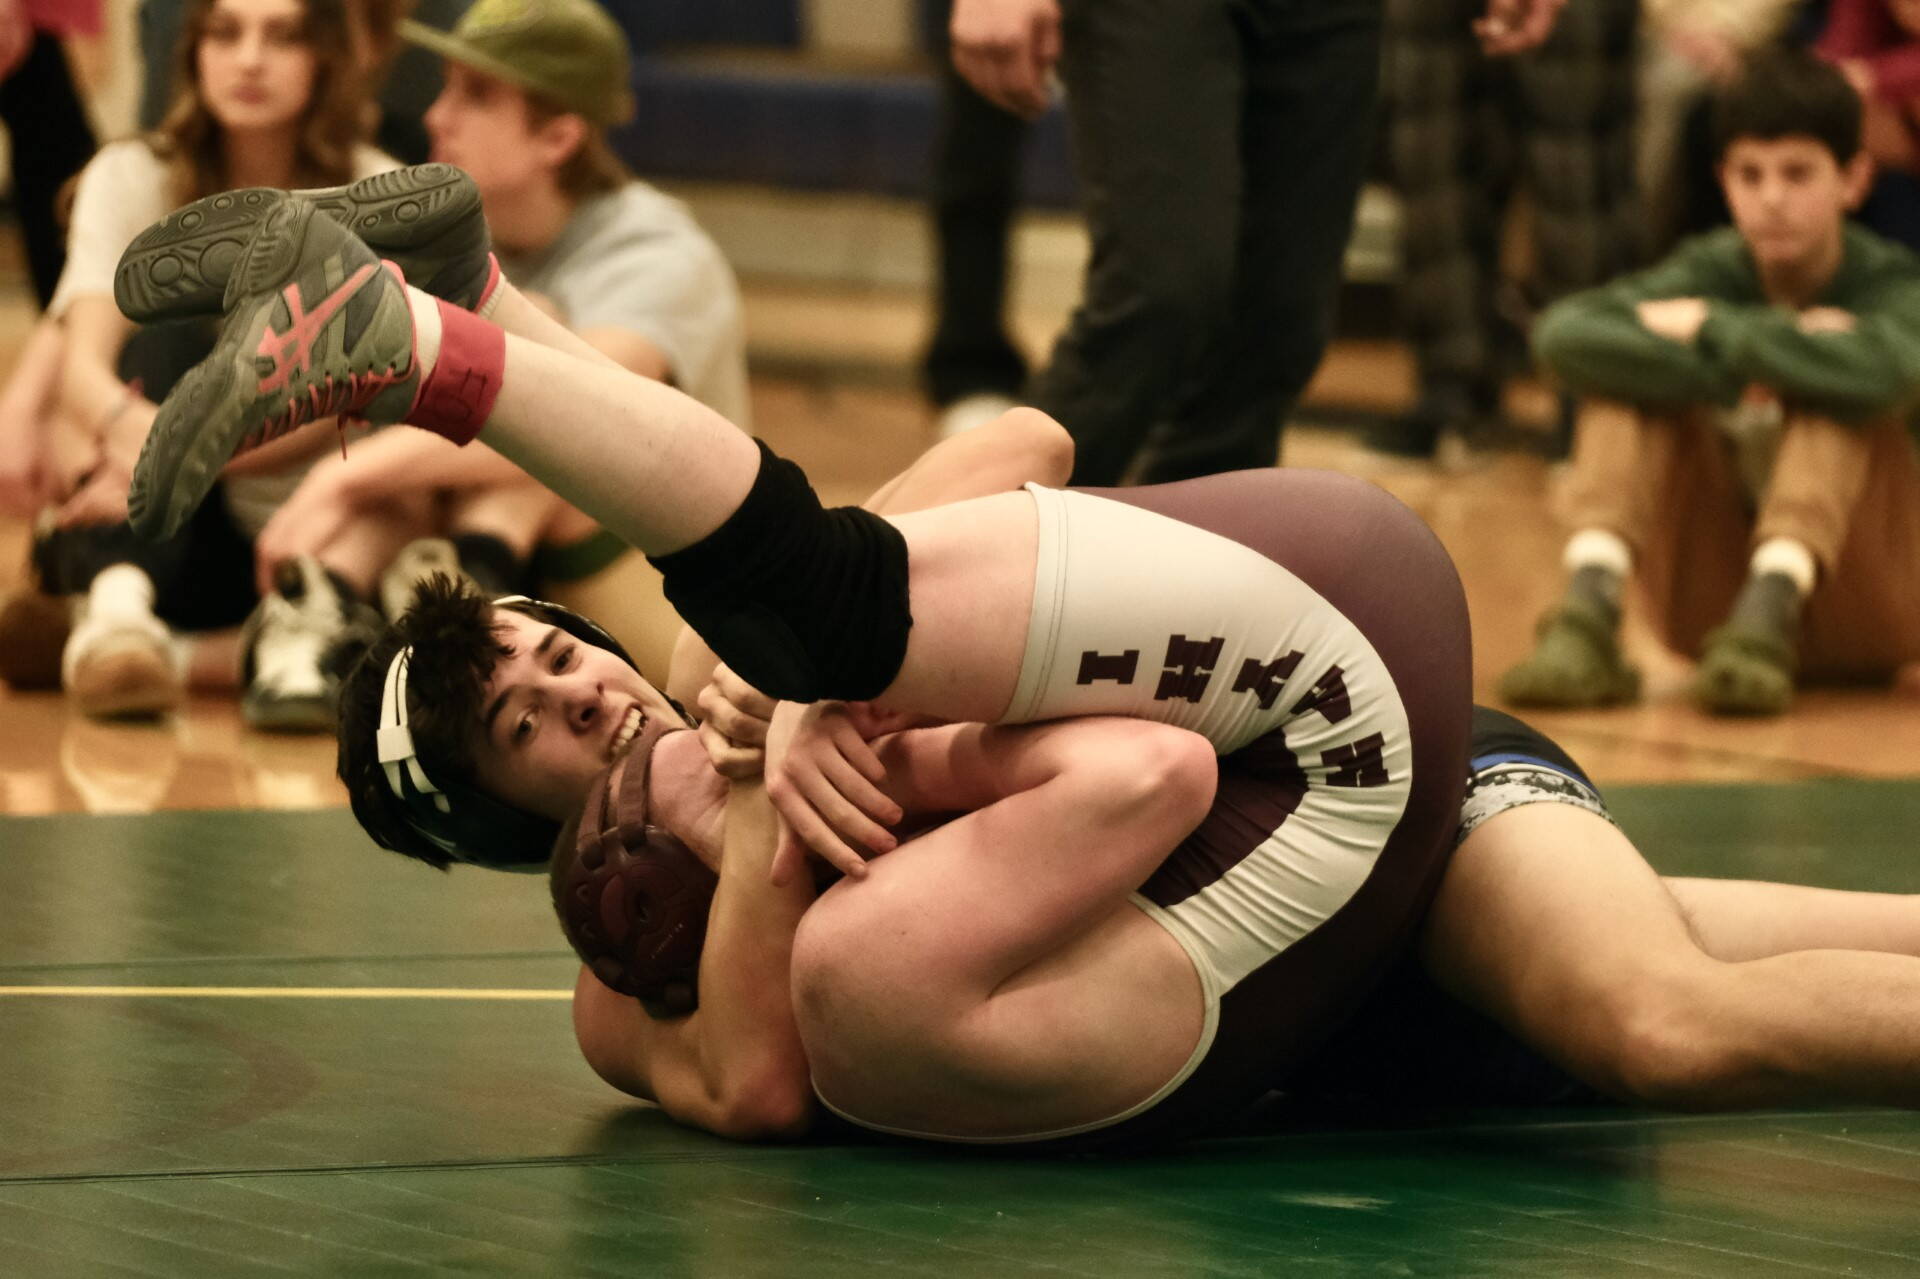 Thunder Mountain senior Liam Hart uses a cradle to pin Ketchikan High School junior Easton Yoder in the 189-pound Division I championship match of the 2023 ASAA Region V wrestling tournament, Saturday, at Thunder Mountain High School. (Klas Stolpe/ For the Juneau Empire)